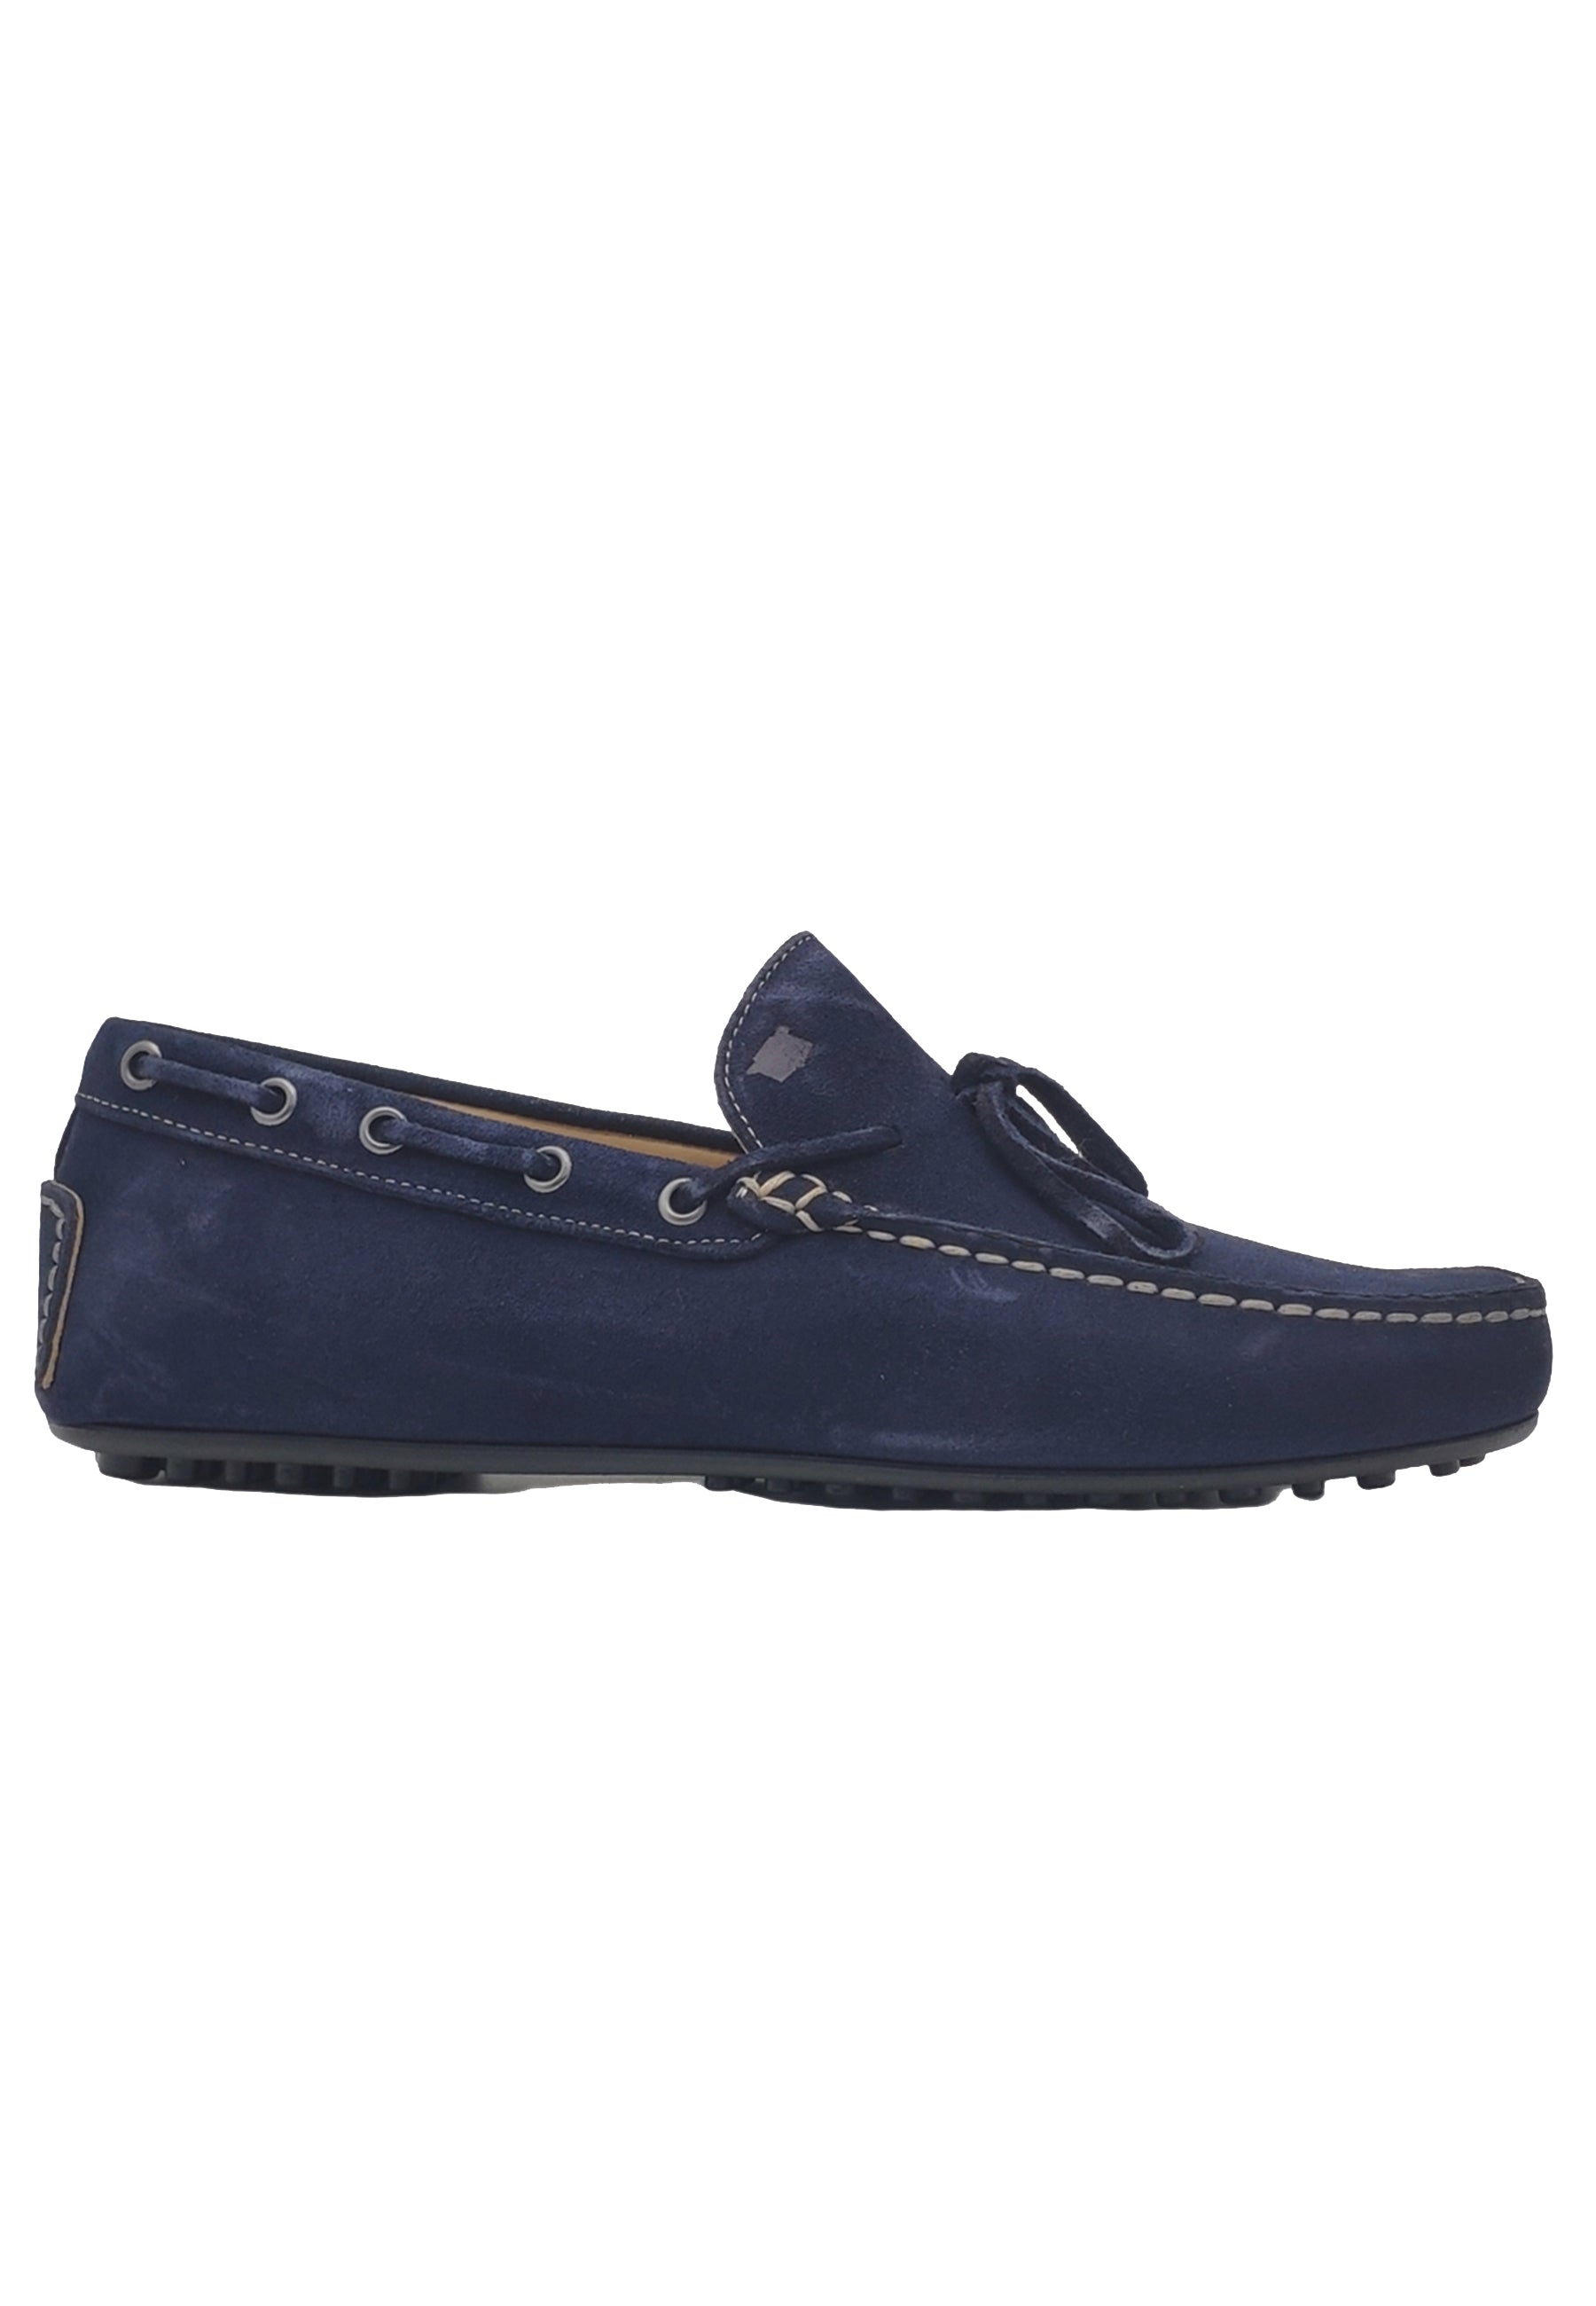 Men's blue suede moccasins with rubber stud bottom